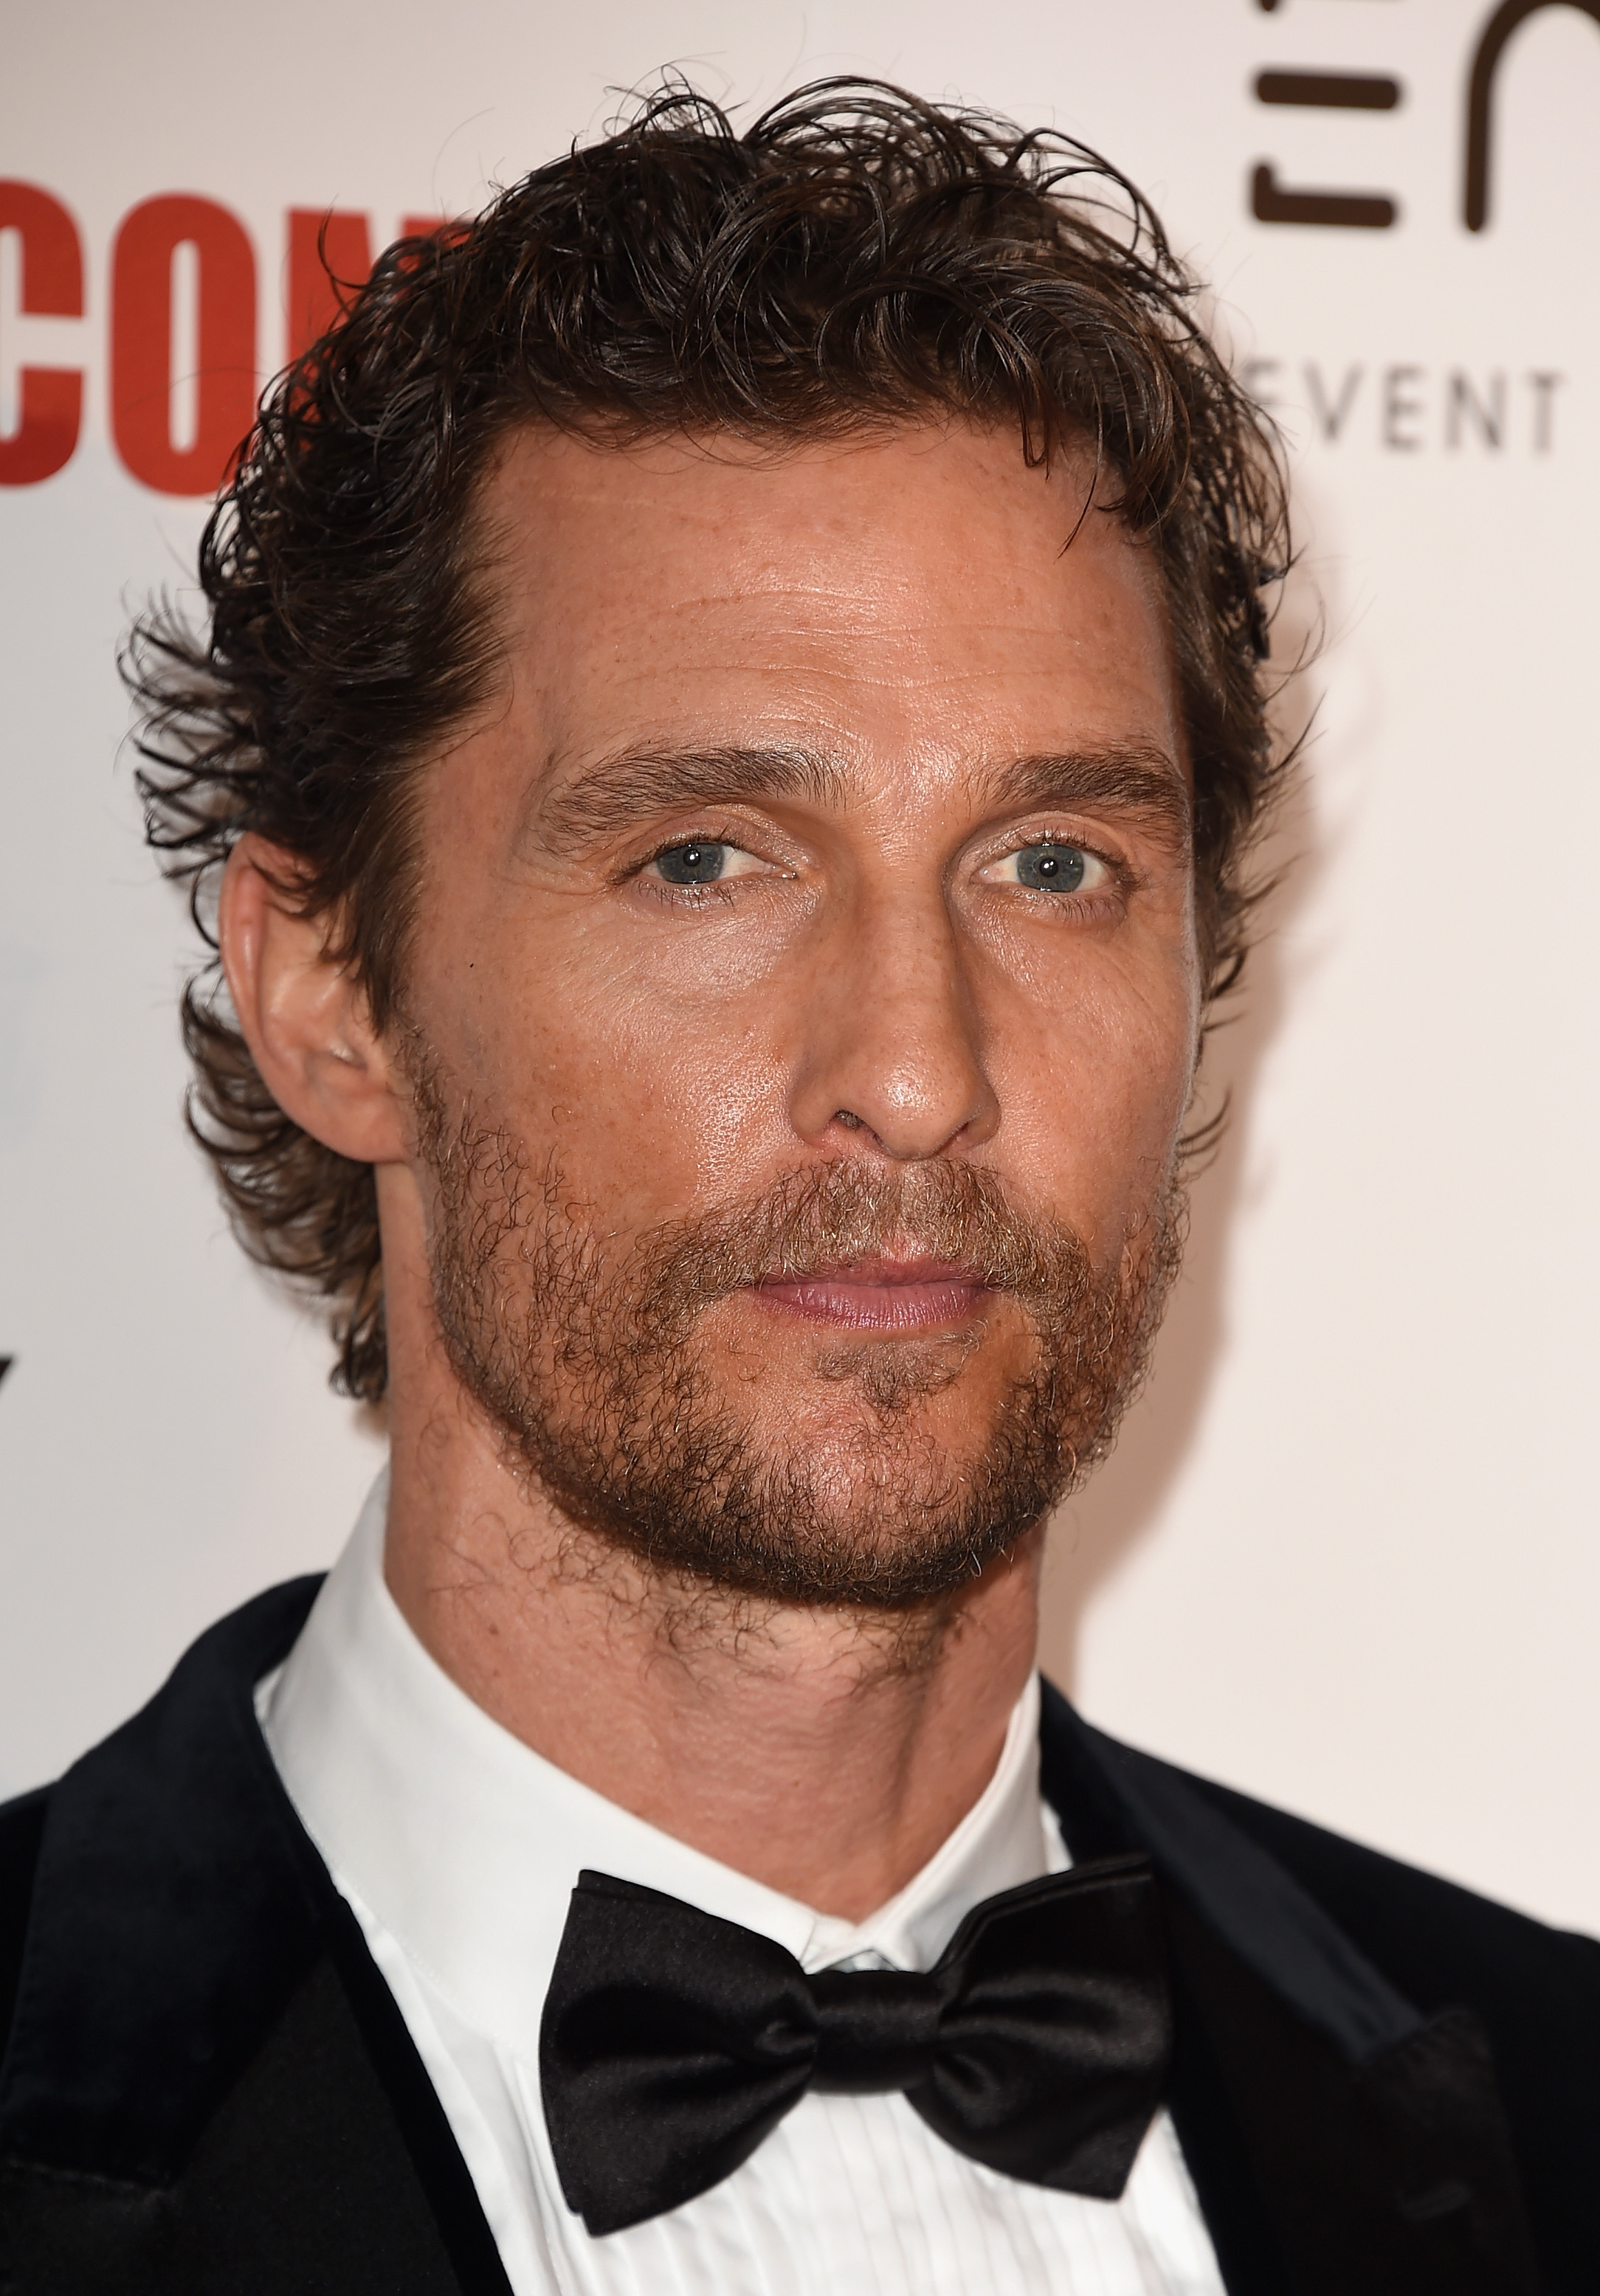 Matthew McConaughey at the 28th American Cinematheque Awards in Beverly Hills, California on October 21, 2014 | Source: Getty Images